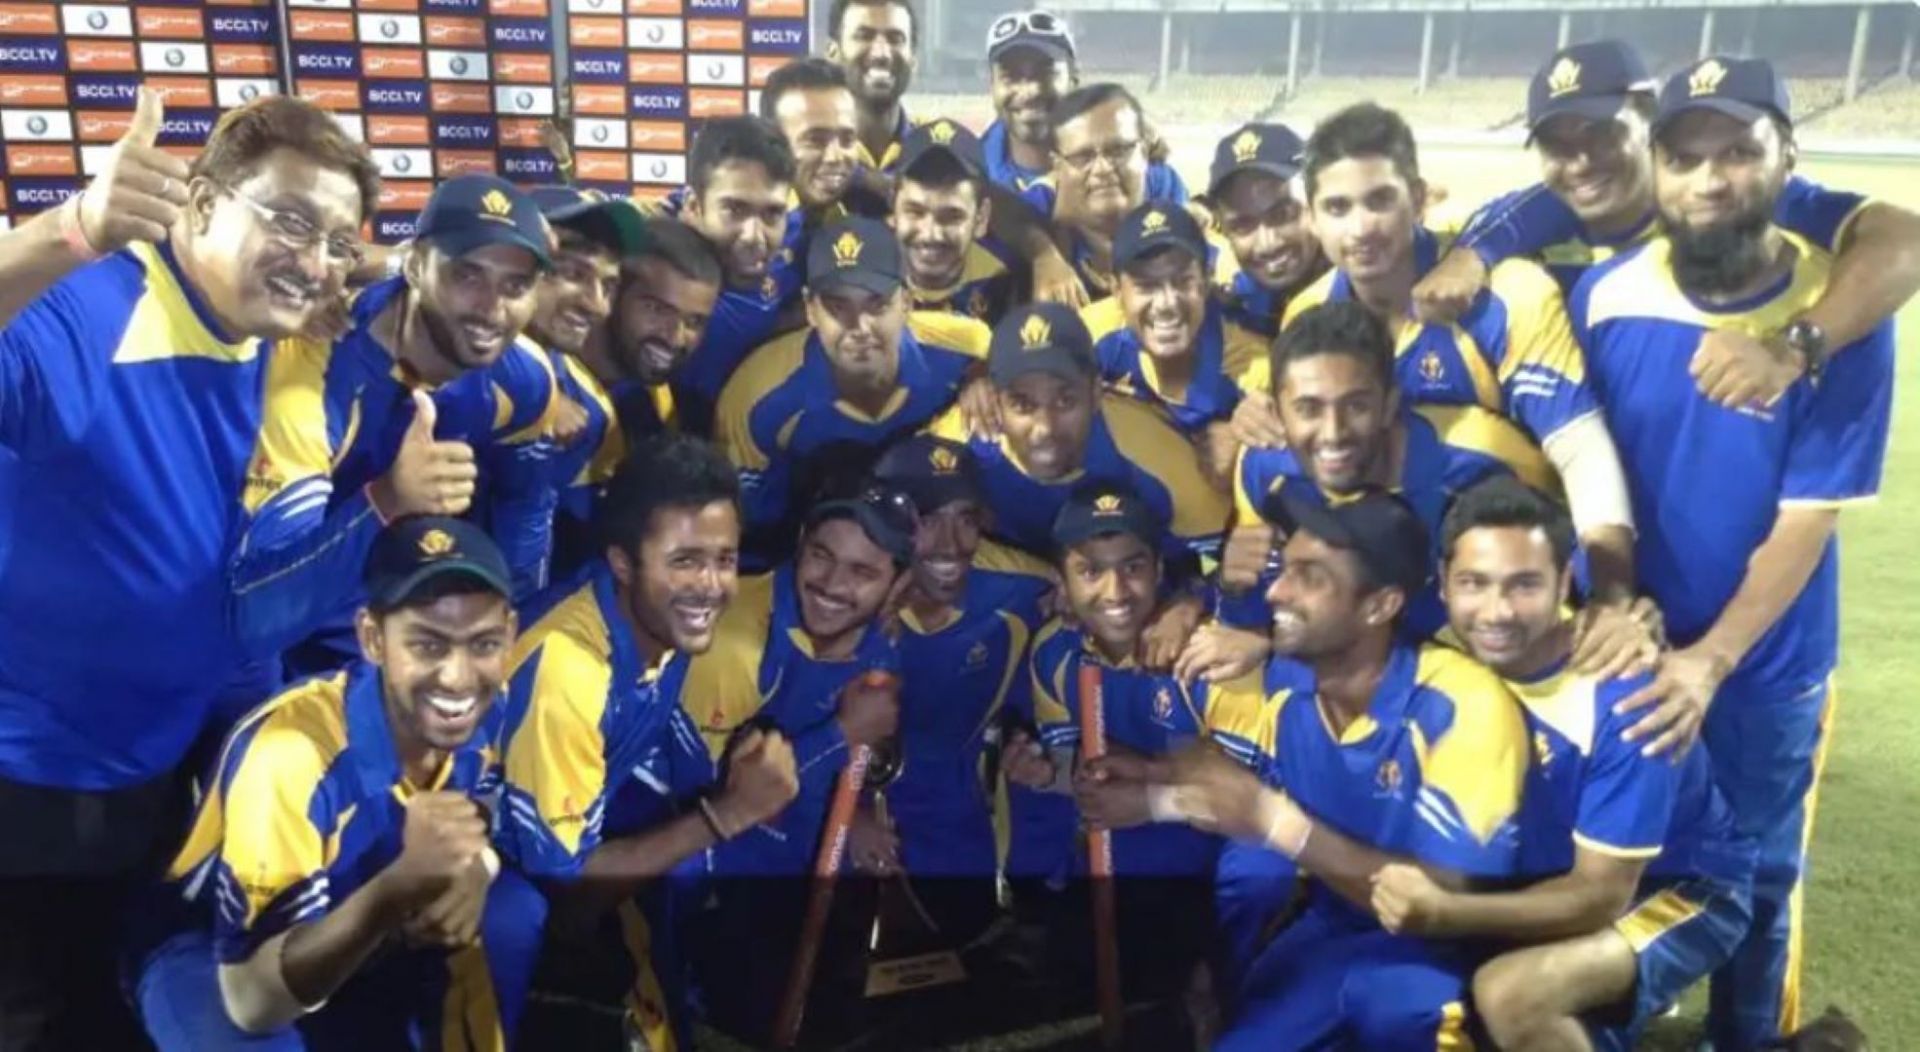 Nair played a magnificent knock to power Karnataka to their second title.